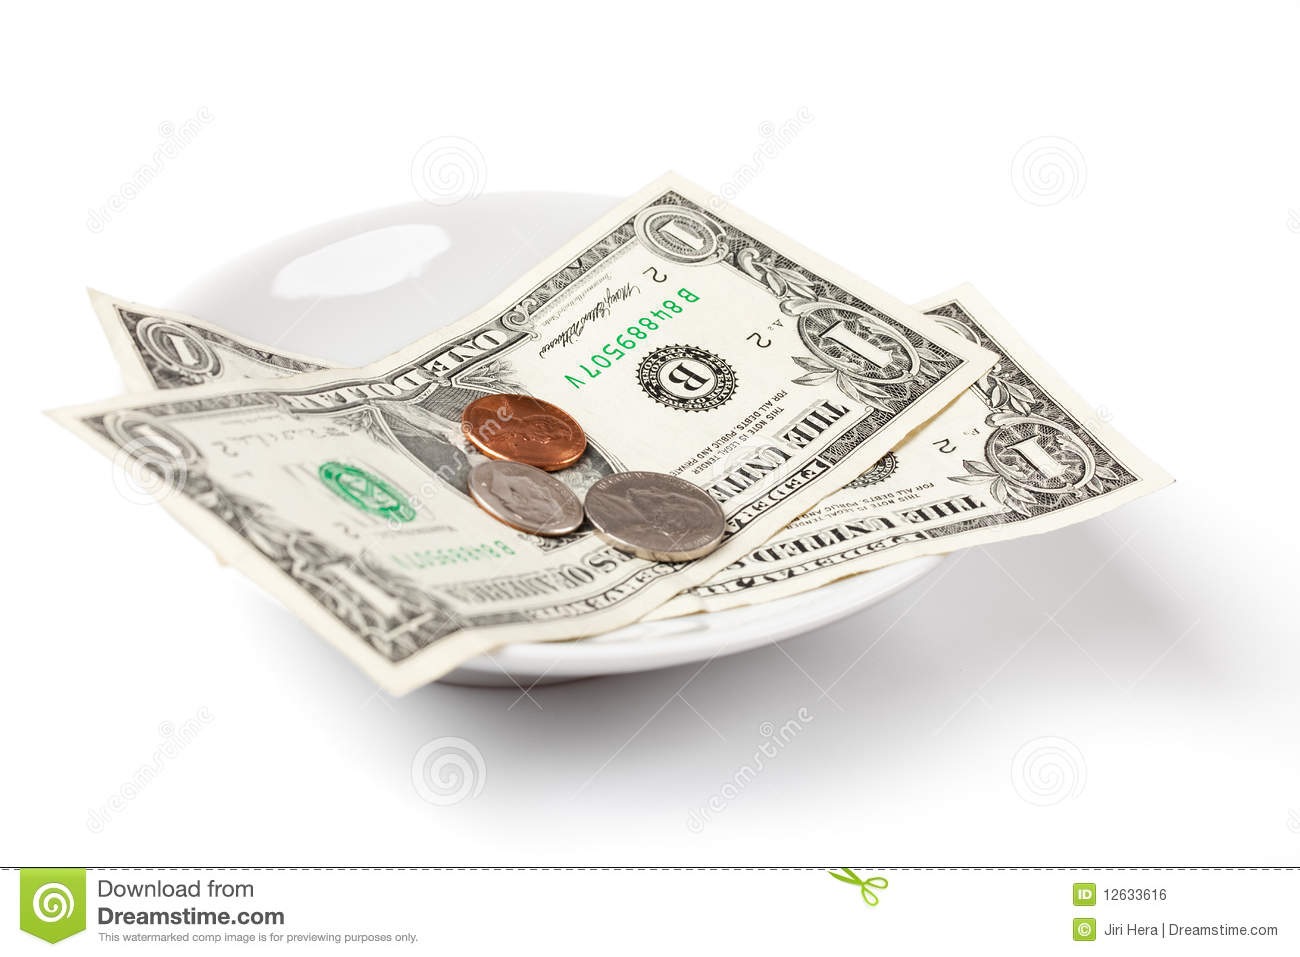 Paying By Money On Plate Royalty Free Stock Image   Image  12633616